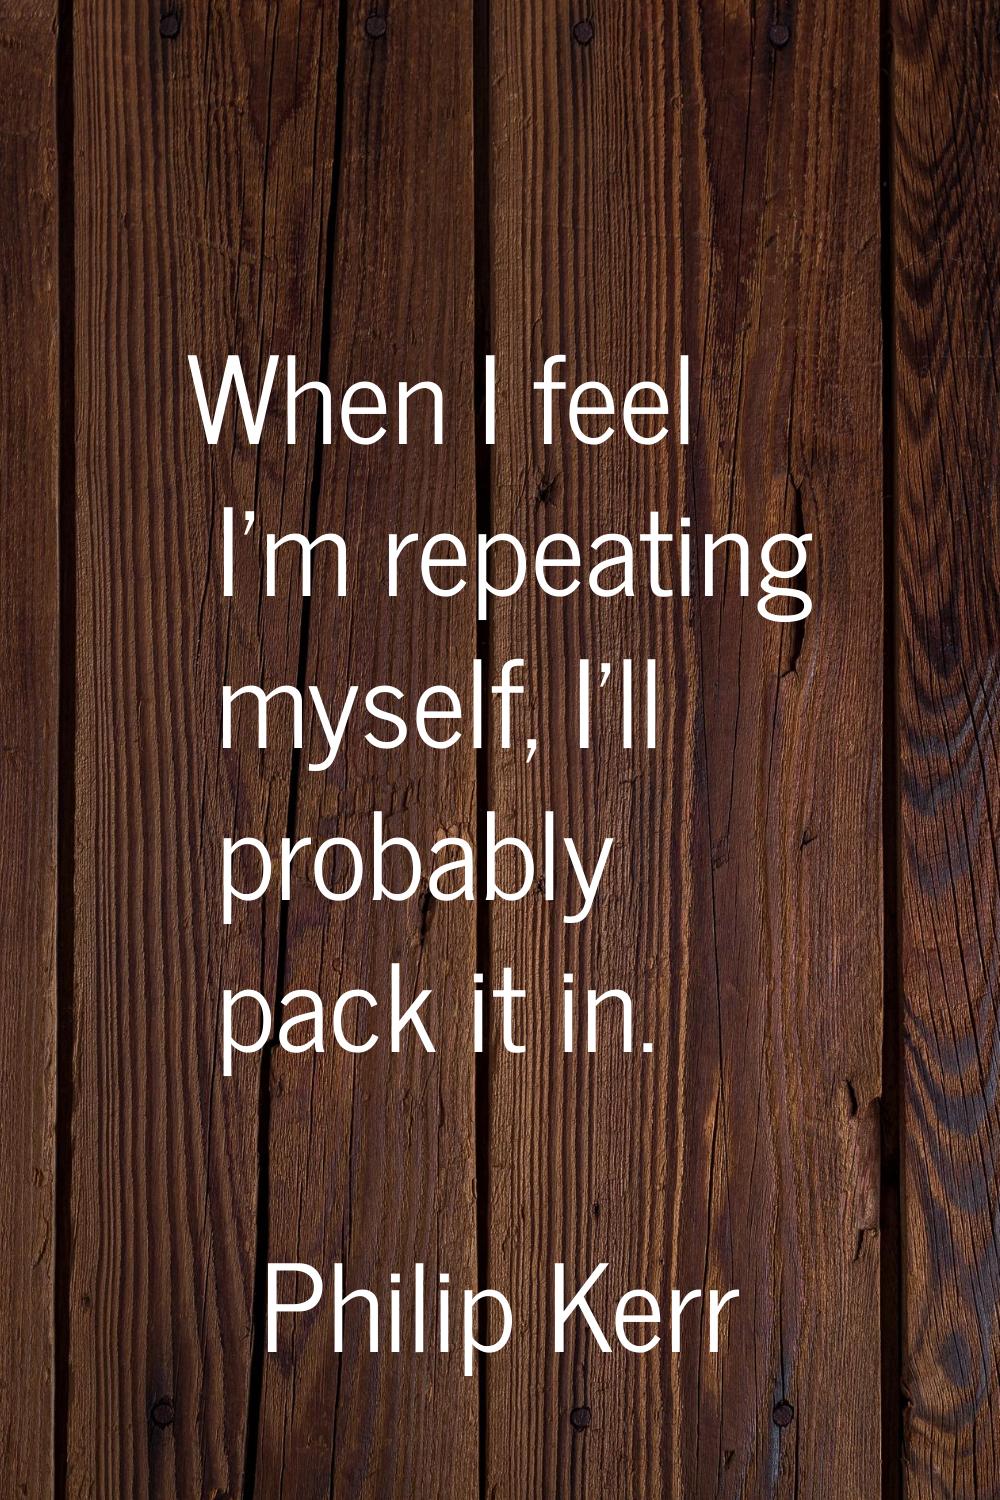 When I feel I'm repeating myself, I'll probably pack it in.